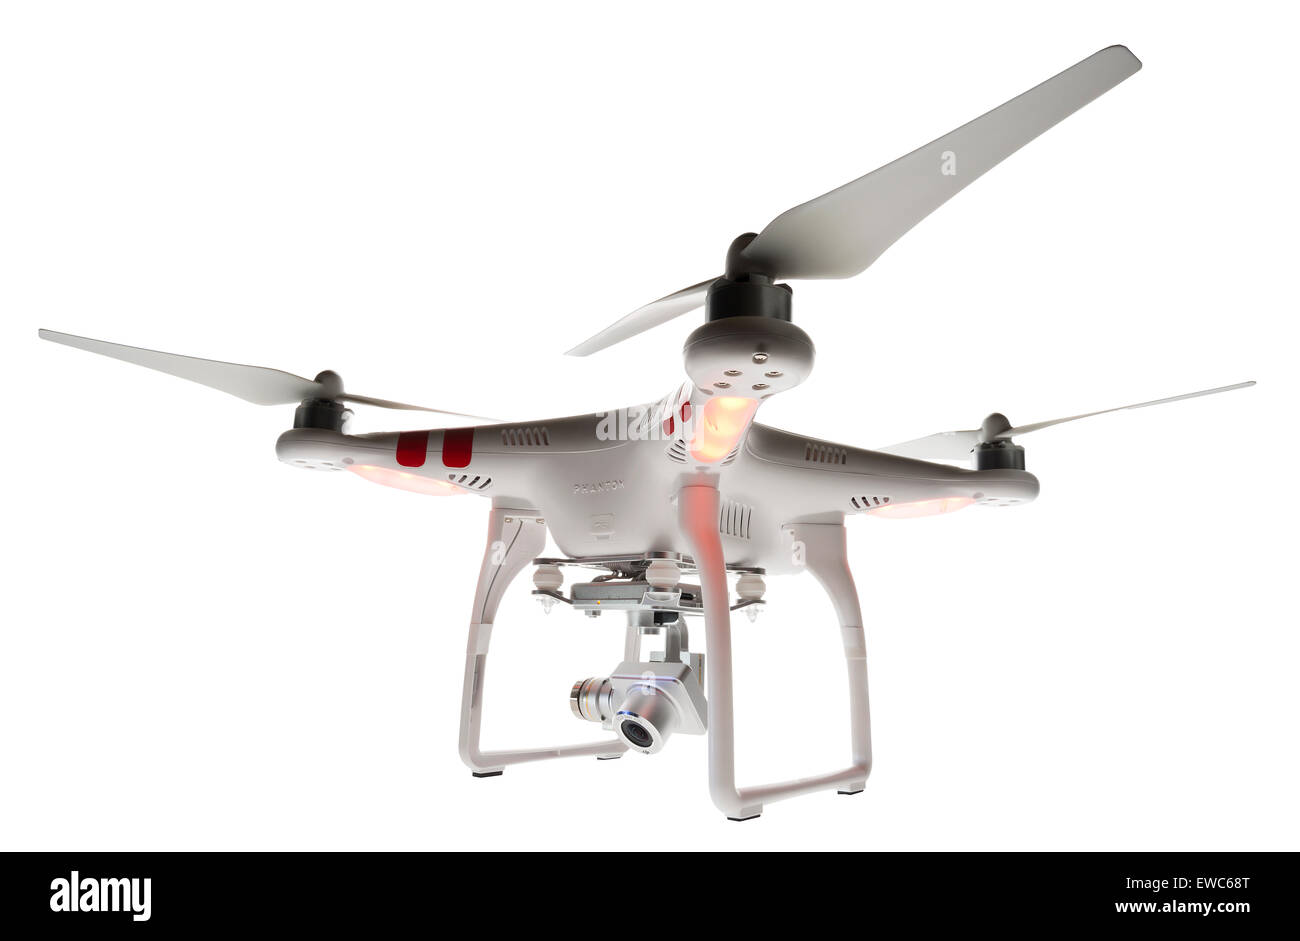 DJI Phantom drone. Aerial video capture. Flying machine. High viewpoint, unmanned aircraft. Remote controlled vertical lift. Stock Photo